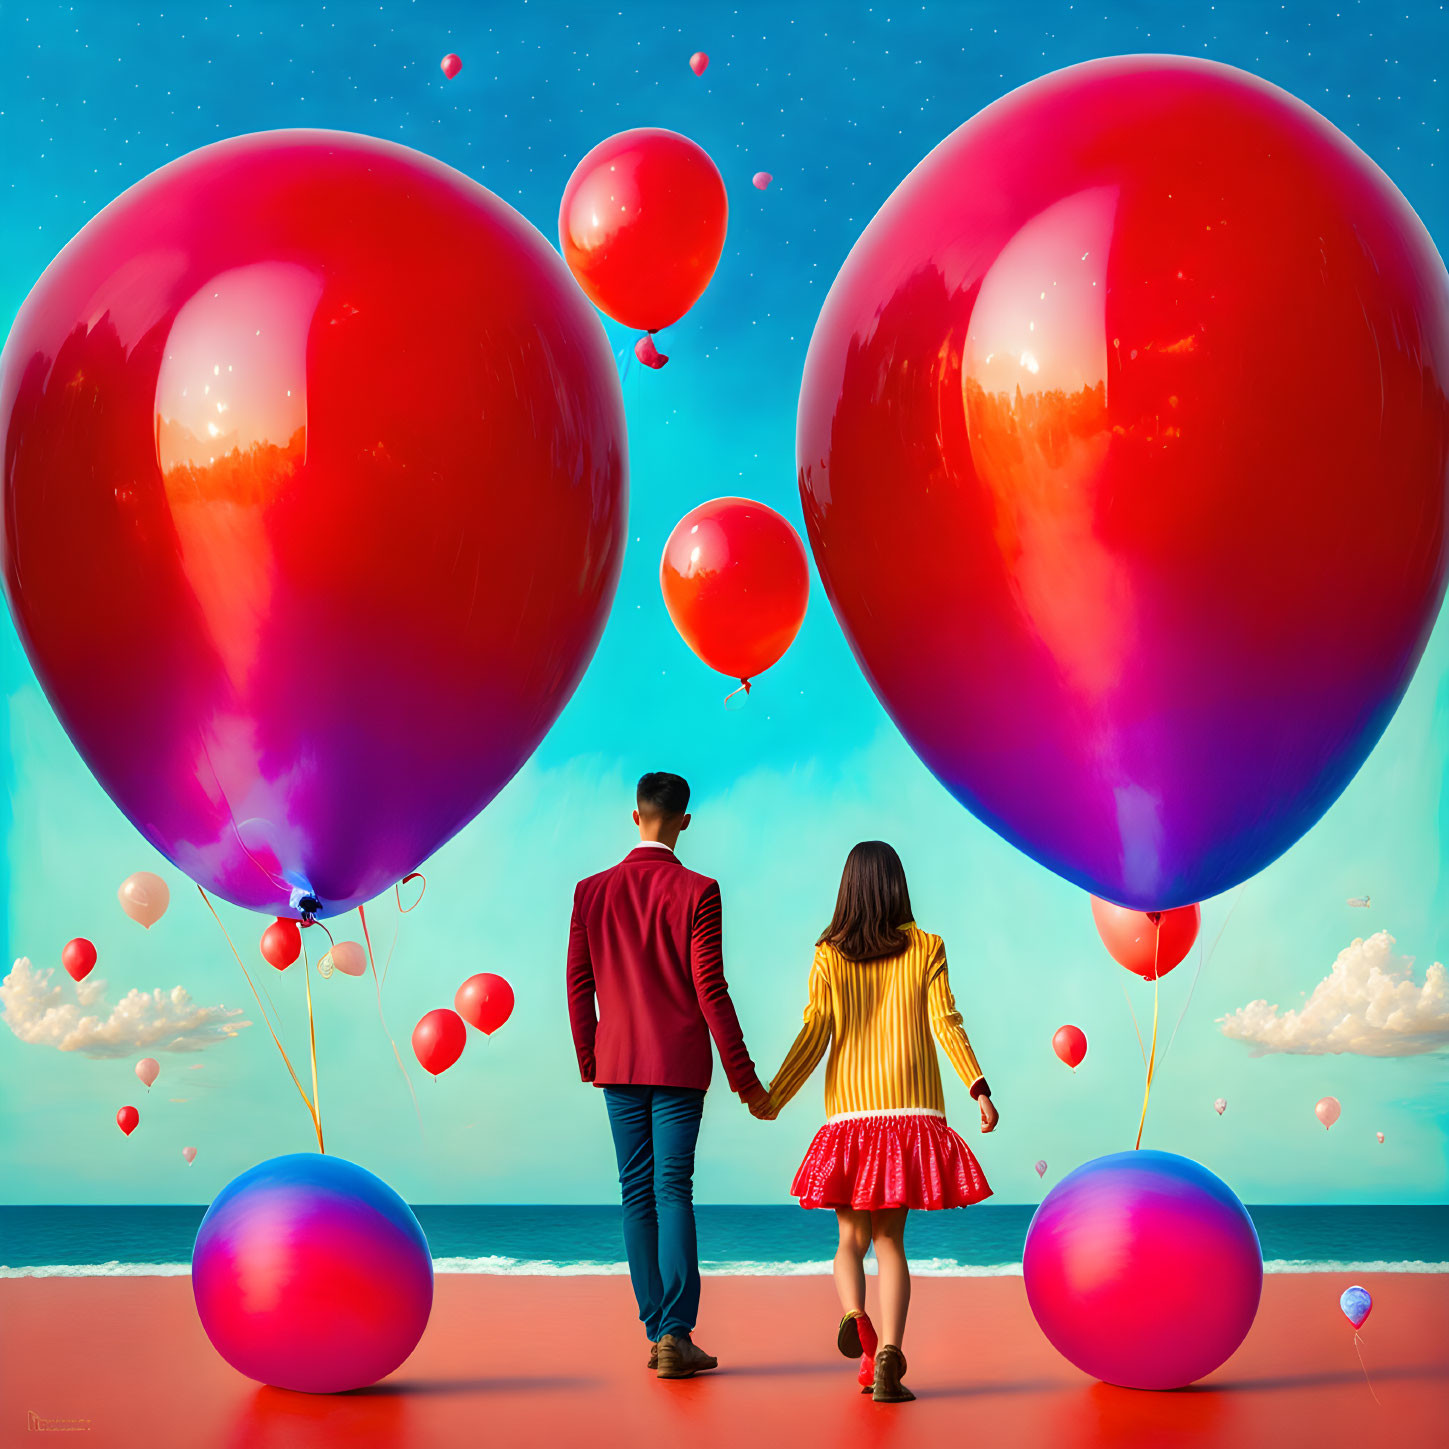 Couple with red balloons by the sea under a blue sky